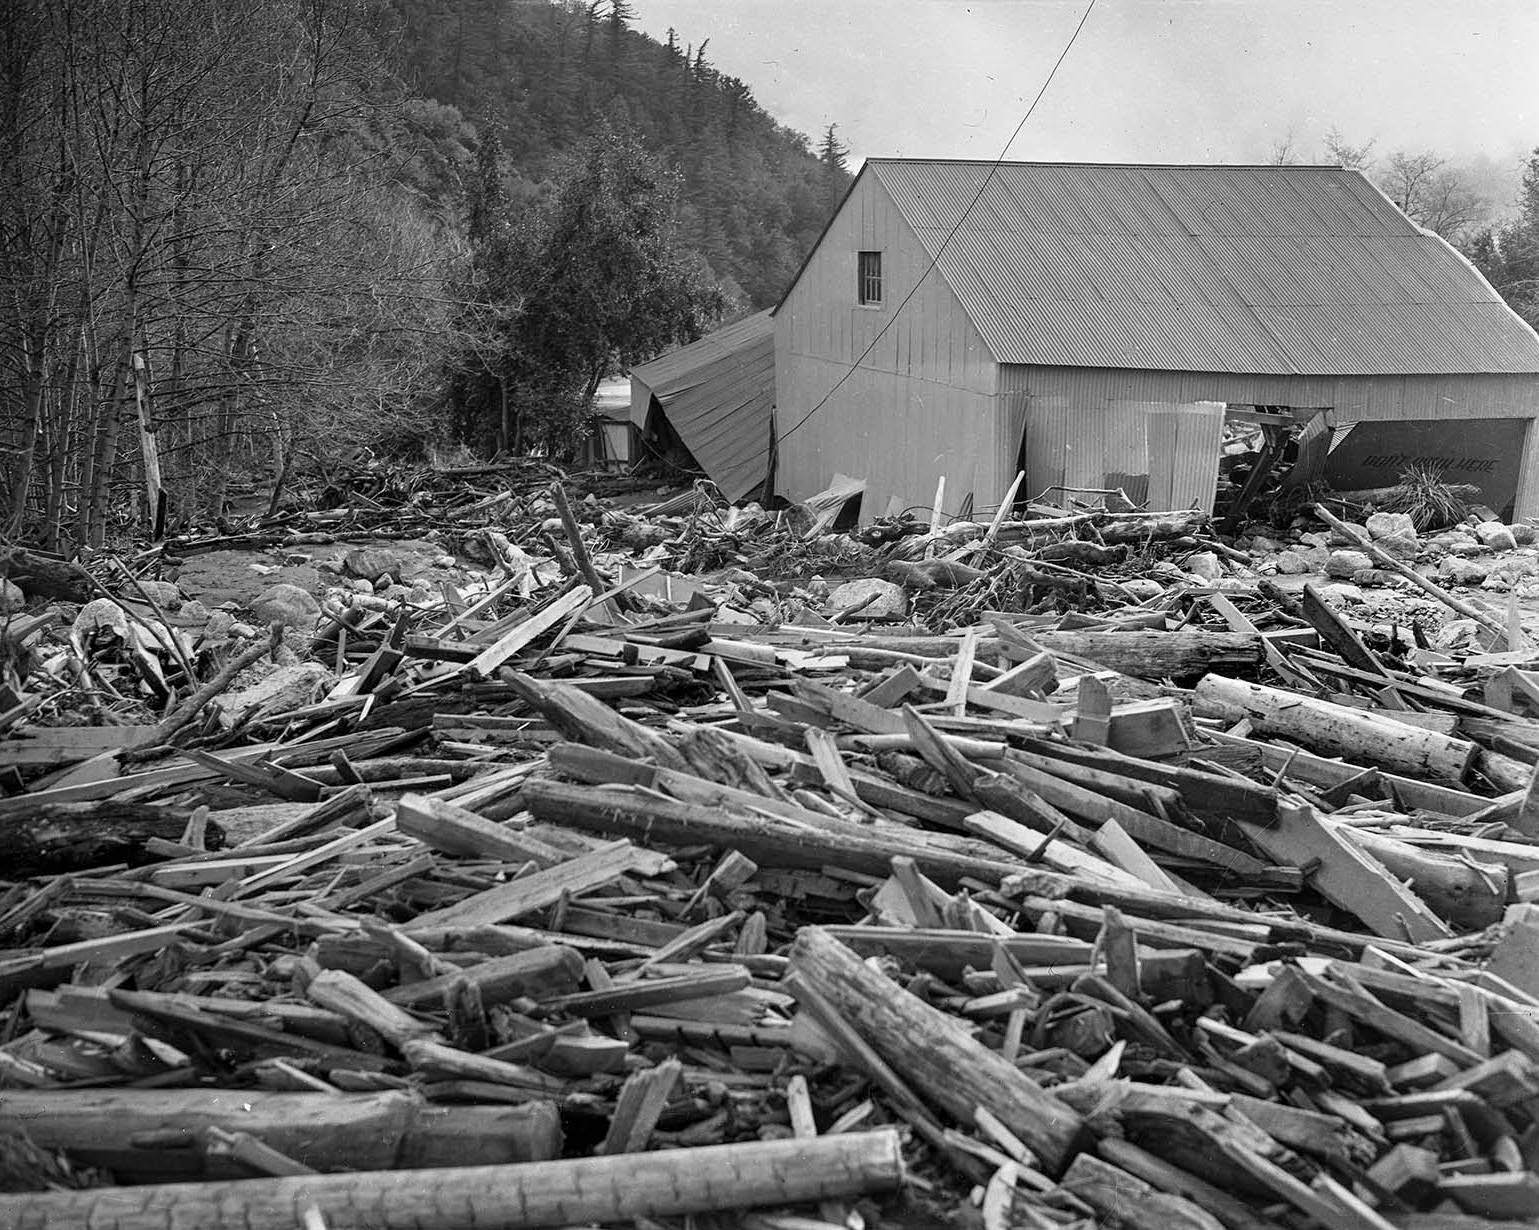 Wreckage piled up in front of the Camp Baldy garage, 1938